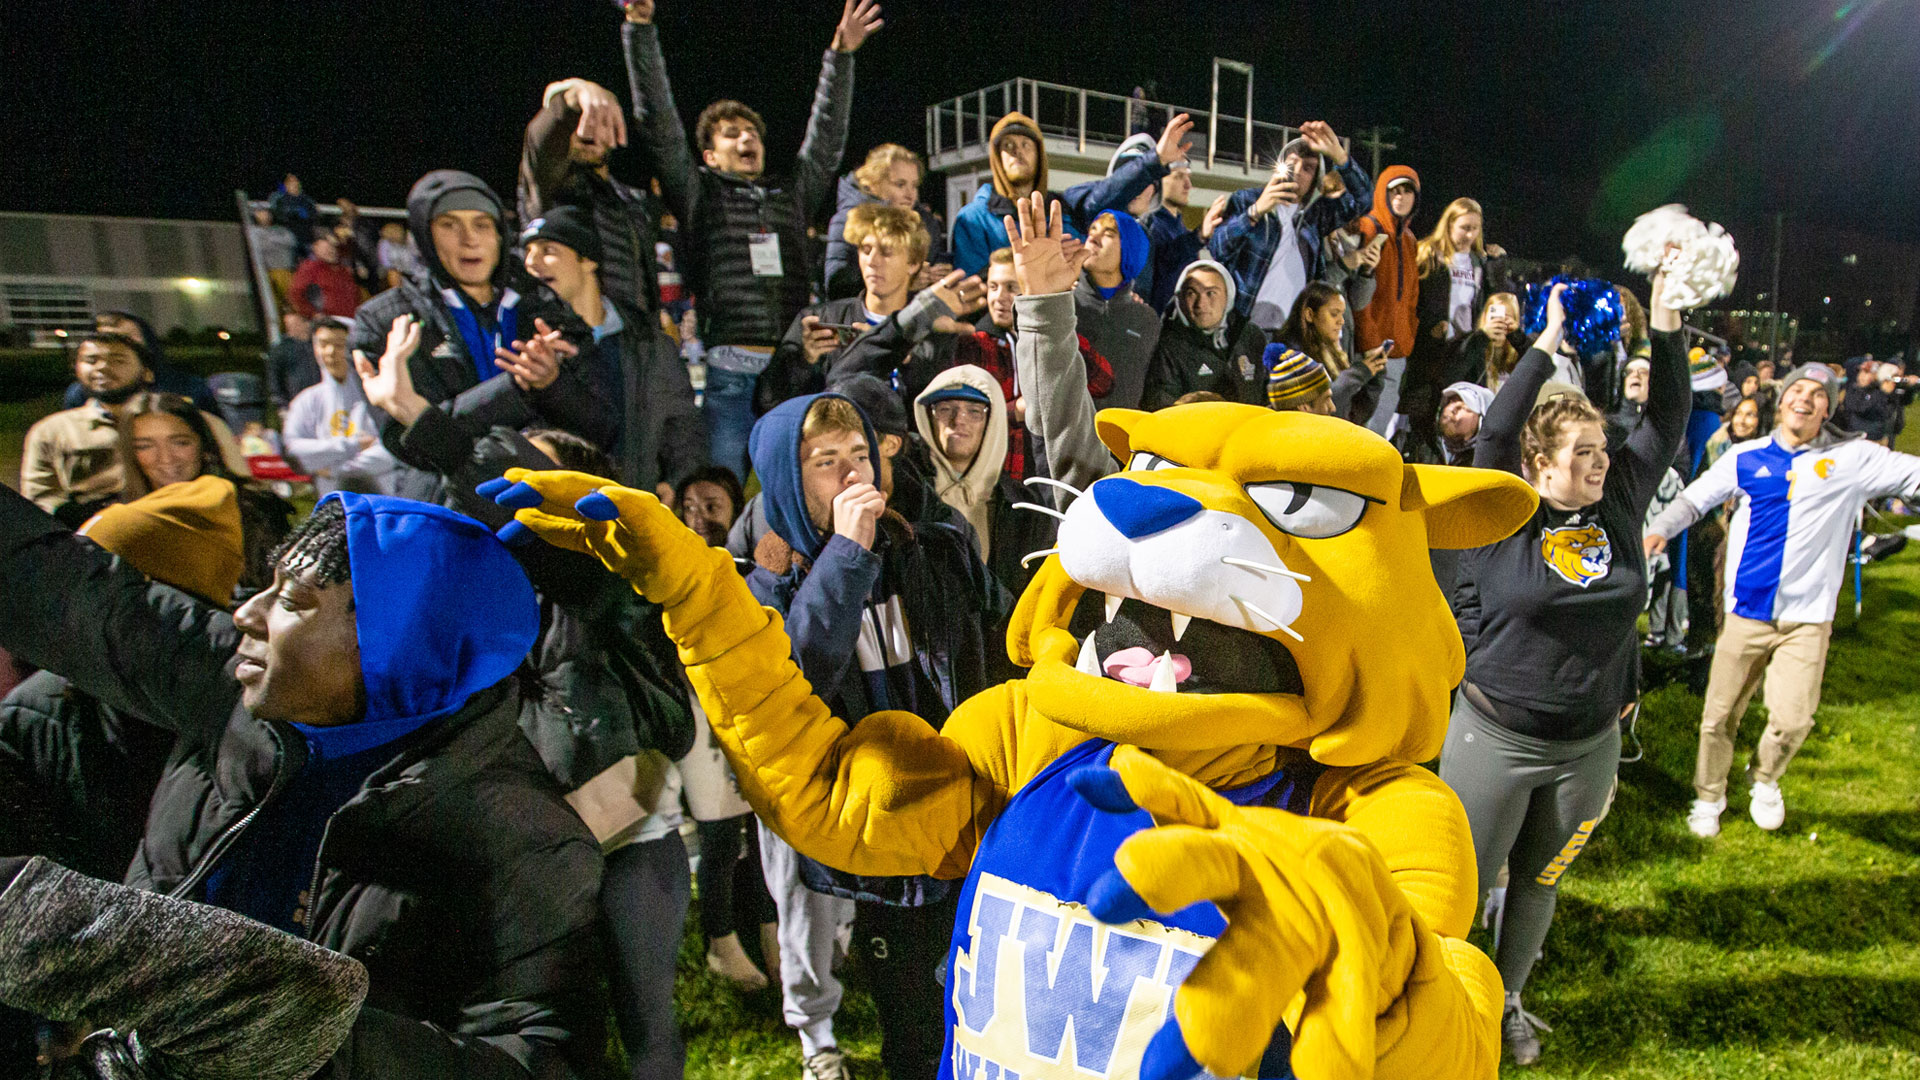 Willie the Wildcat celebrates in front of a happy crowd at the women's soccer team win in November 2021